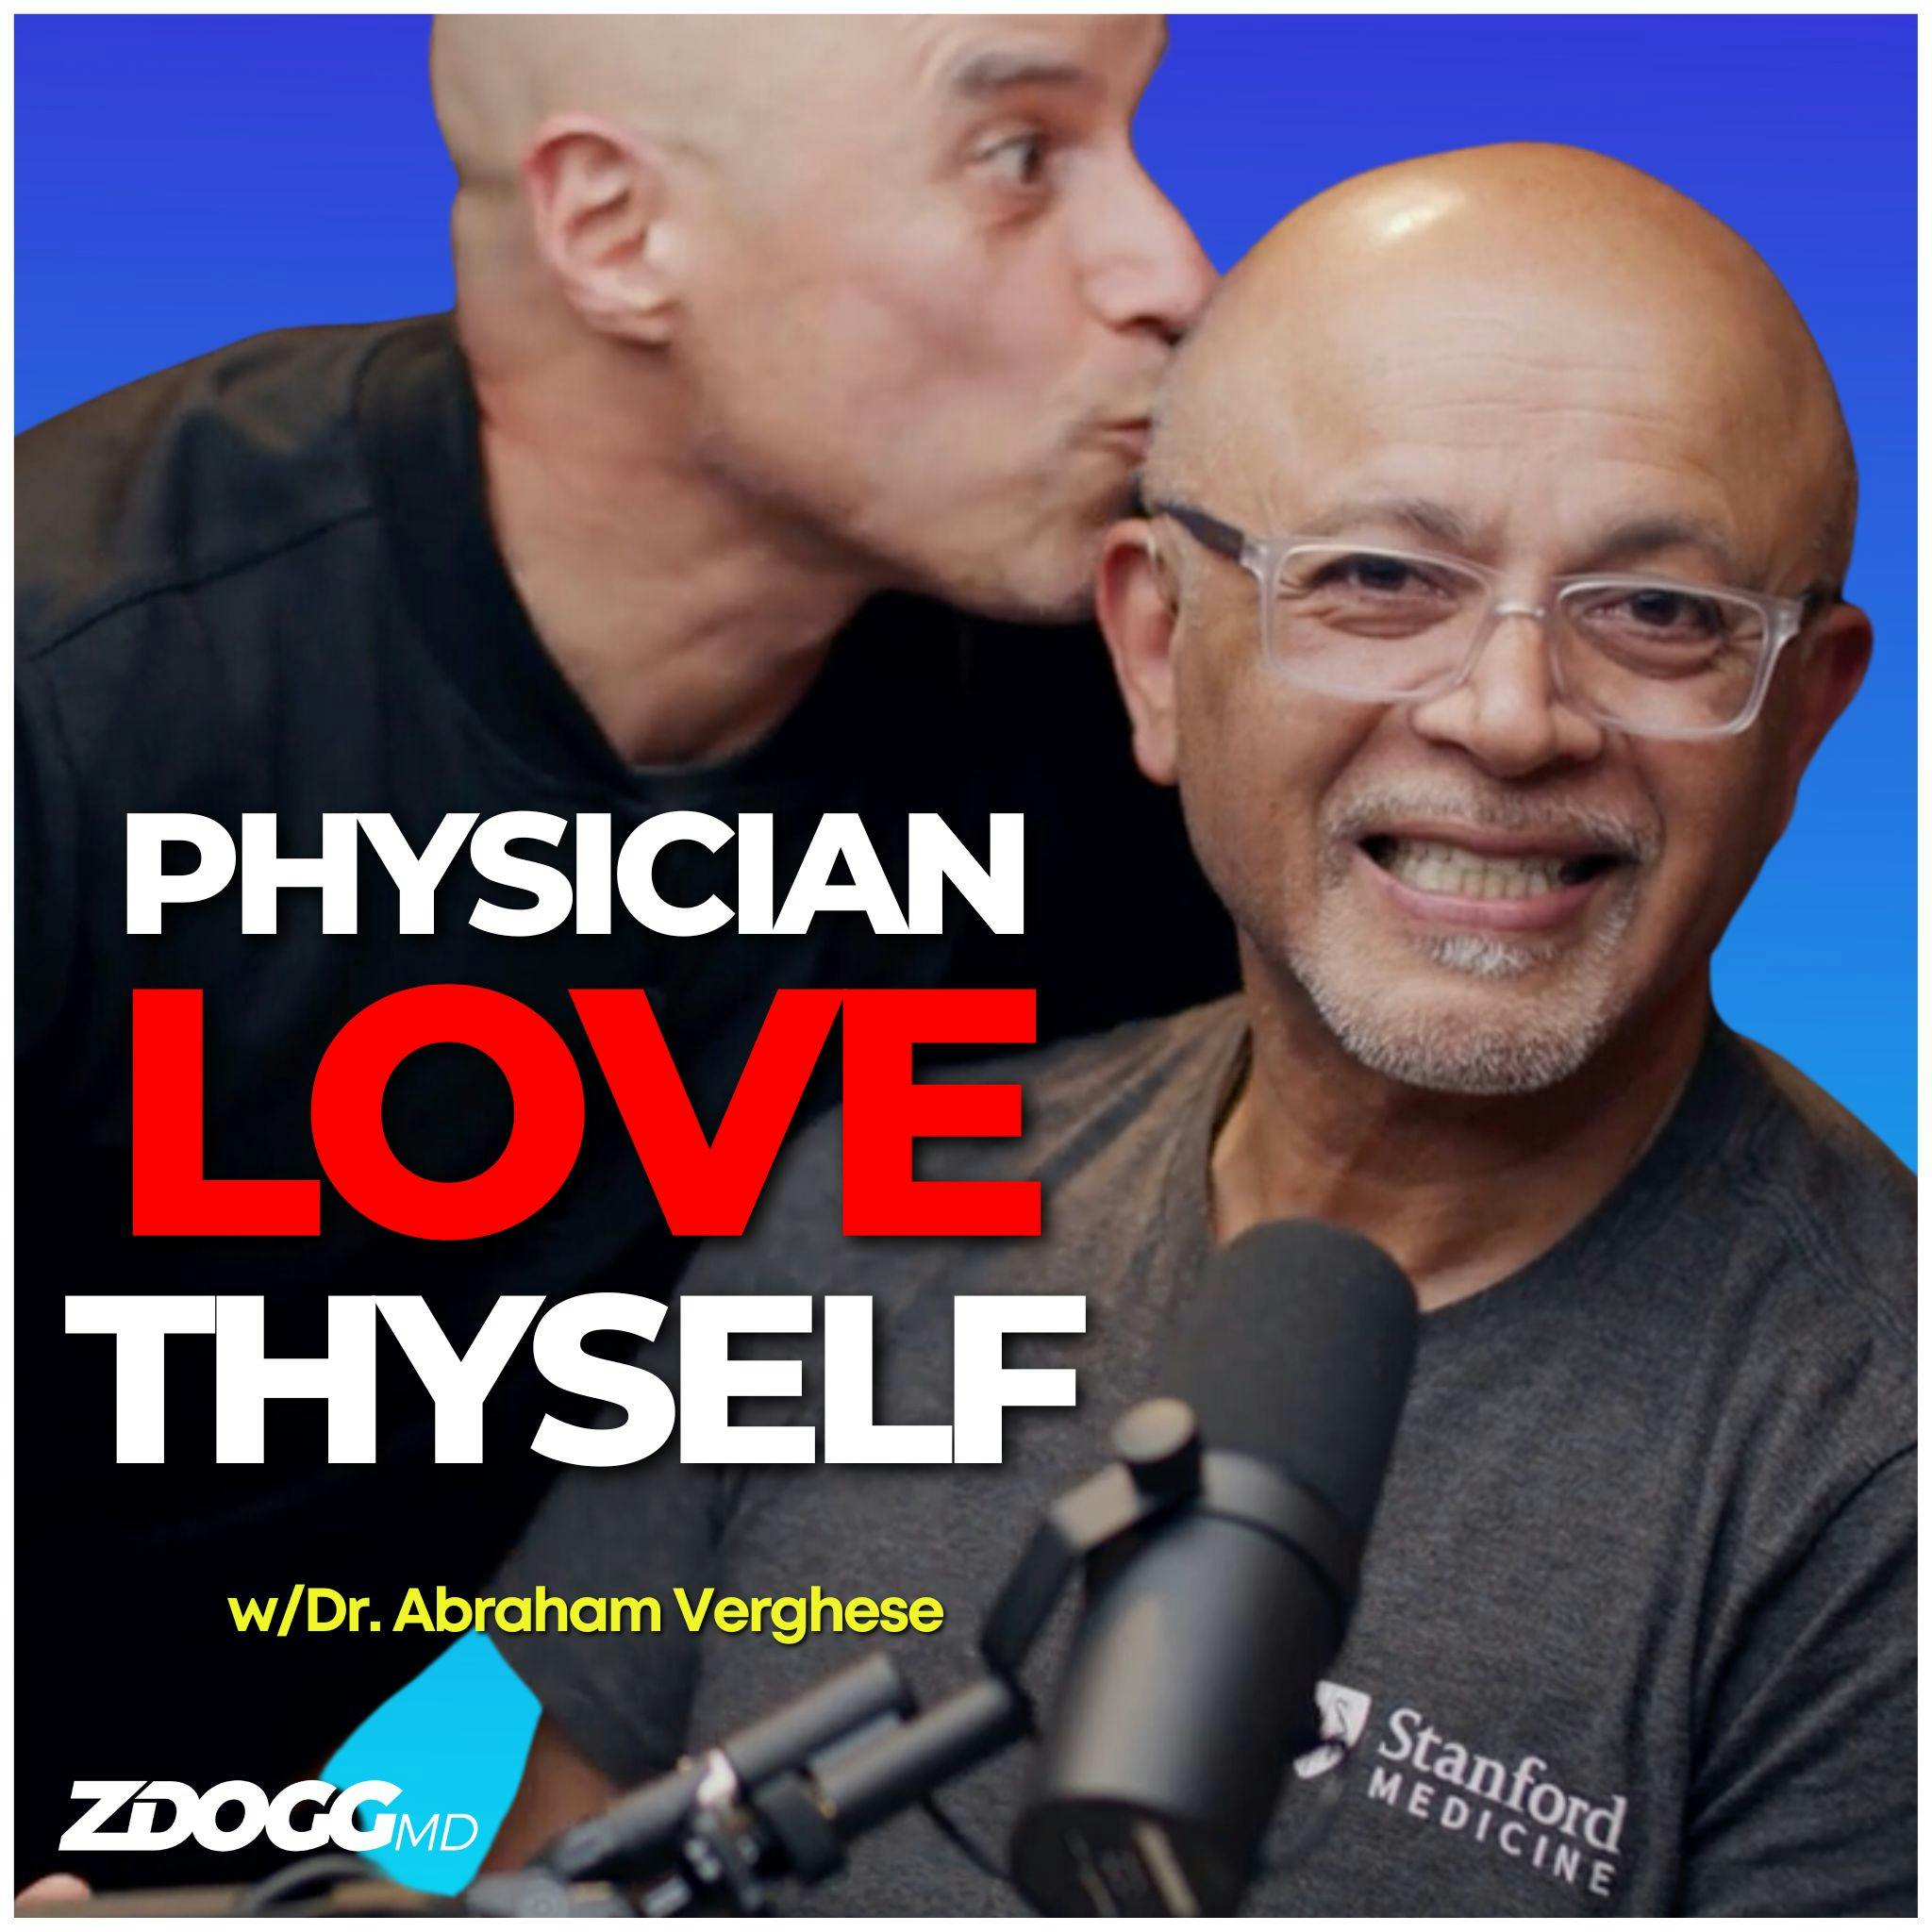 The Bald and the Beautiful: A Chat w/Dr. Abraham Verghese